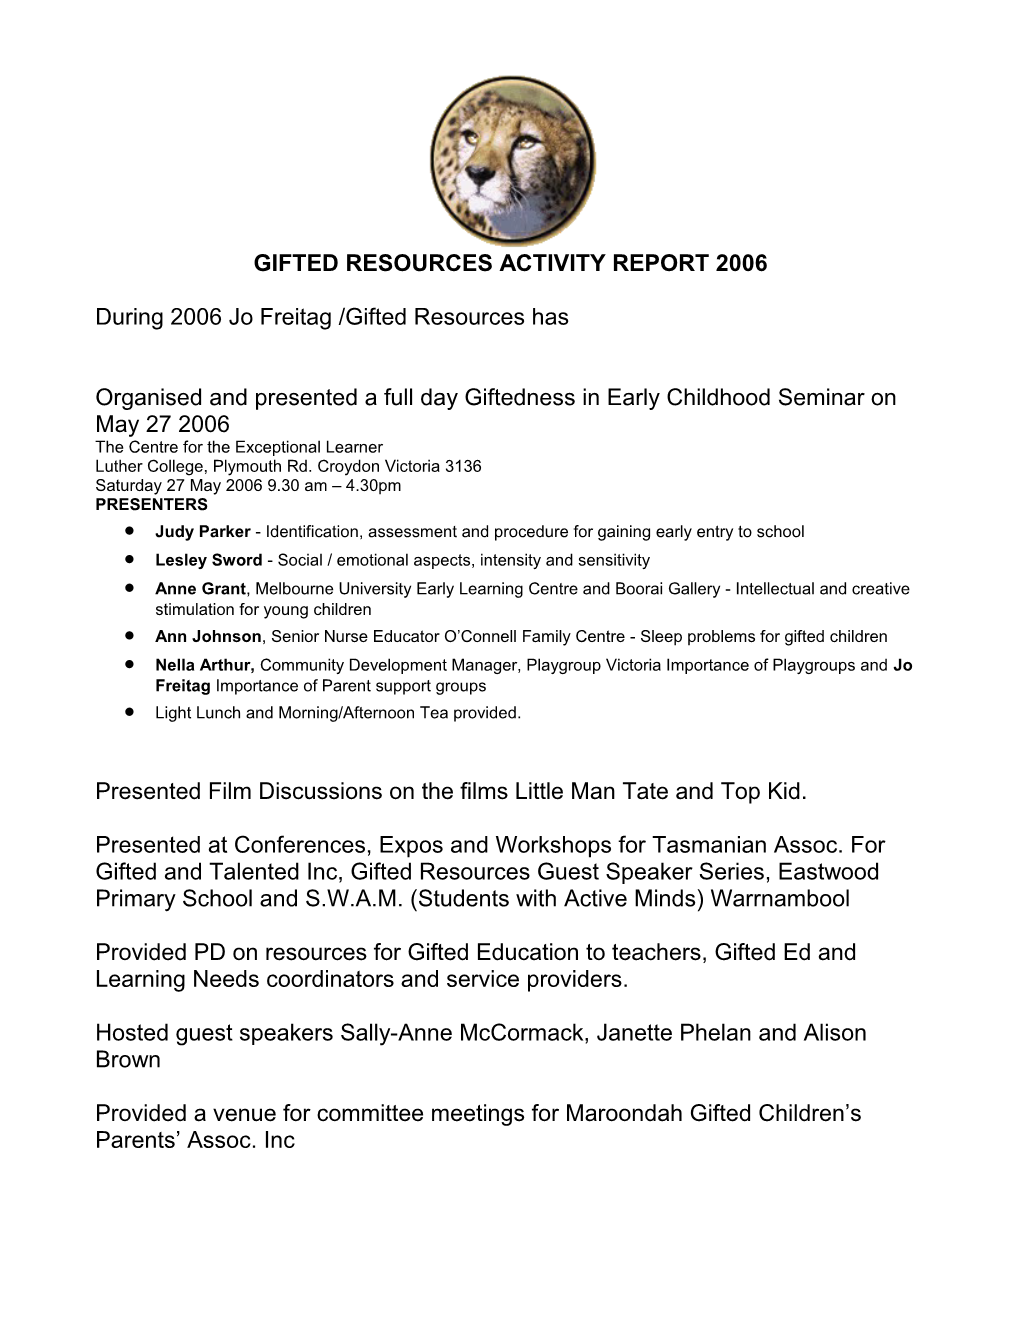 Gifted Resources Activity Report 2006